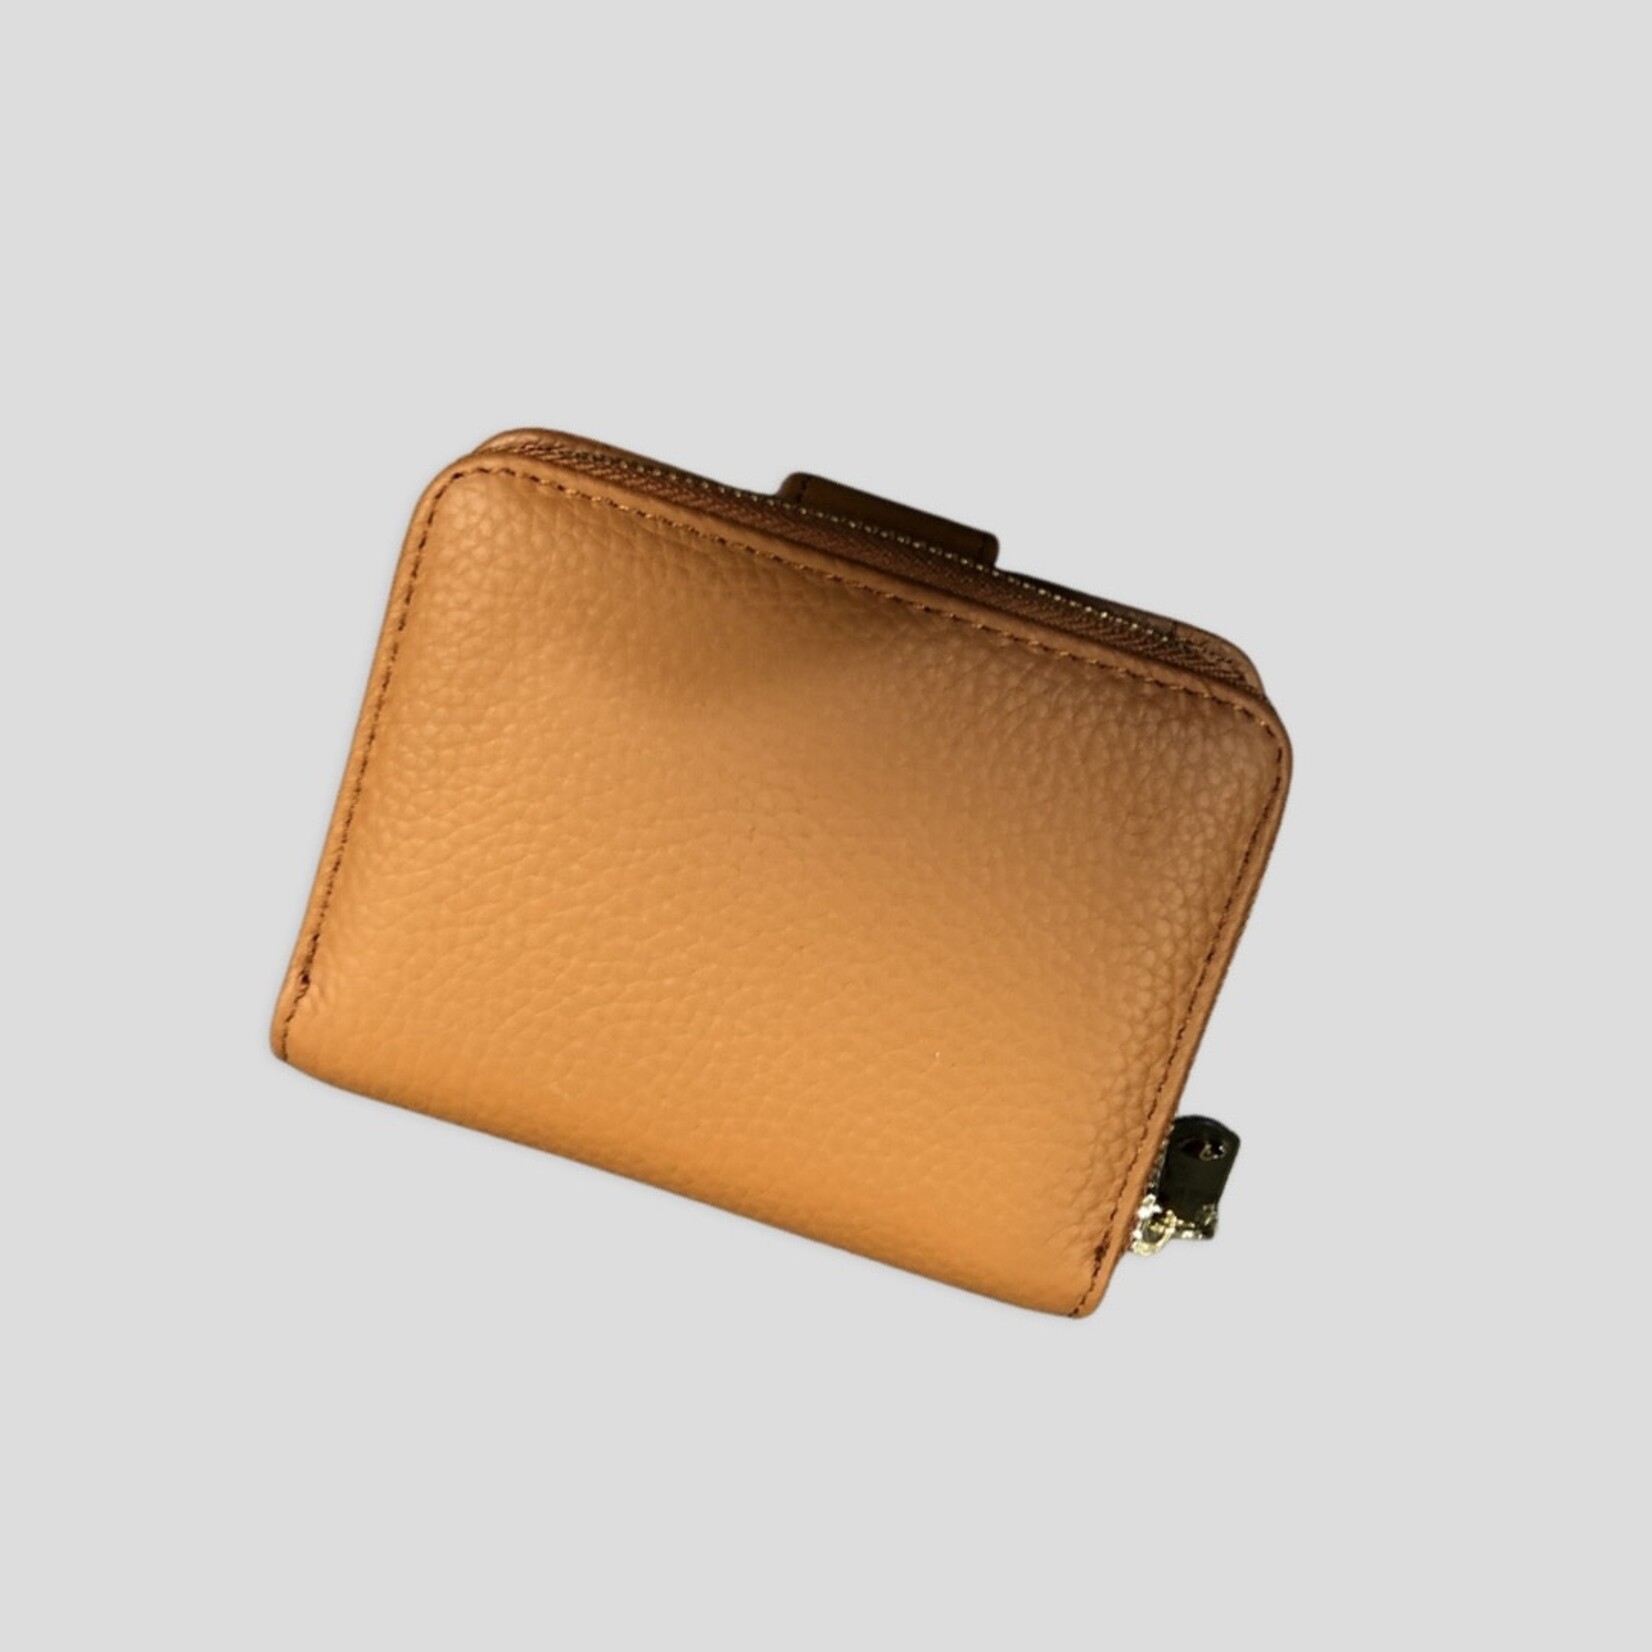 Annucci Leather Tan Moonya Leather 11.5cm x 10cm Wallet